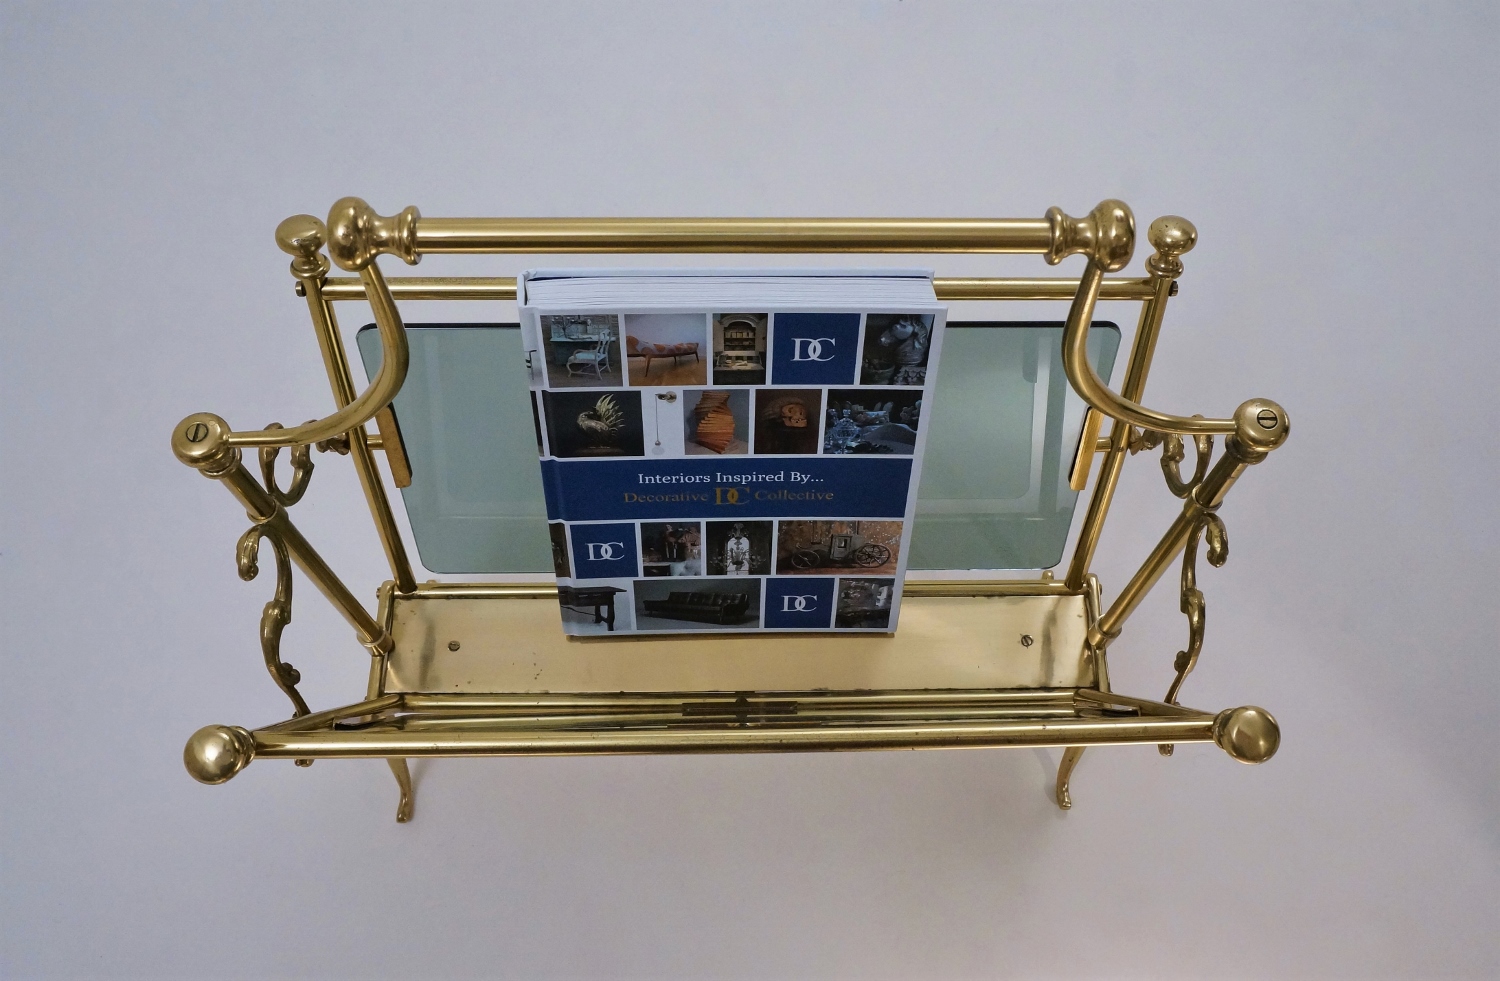 A 1950's French Brass Etagere - Stock - Blanchard Collective